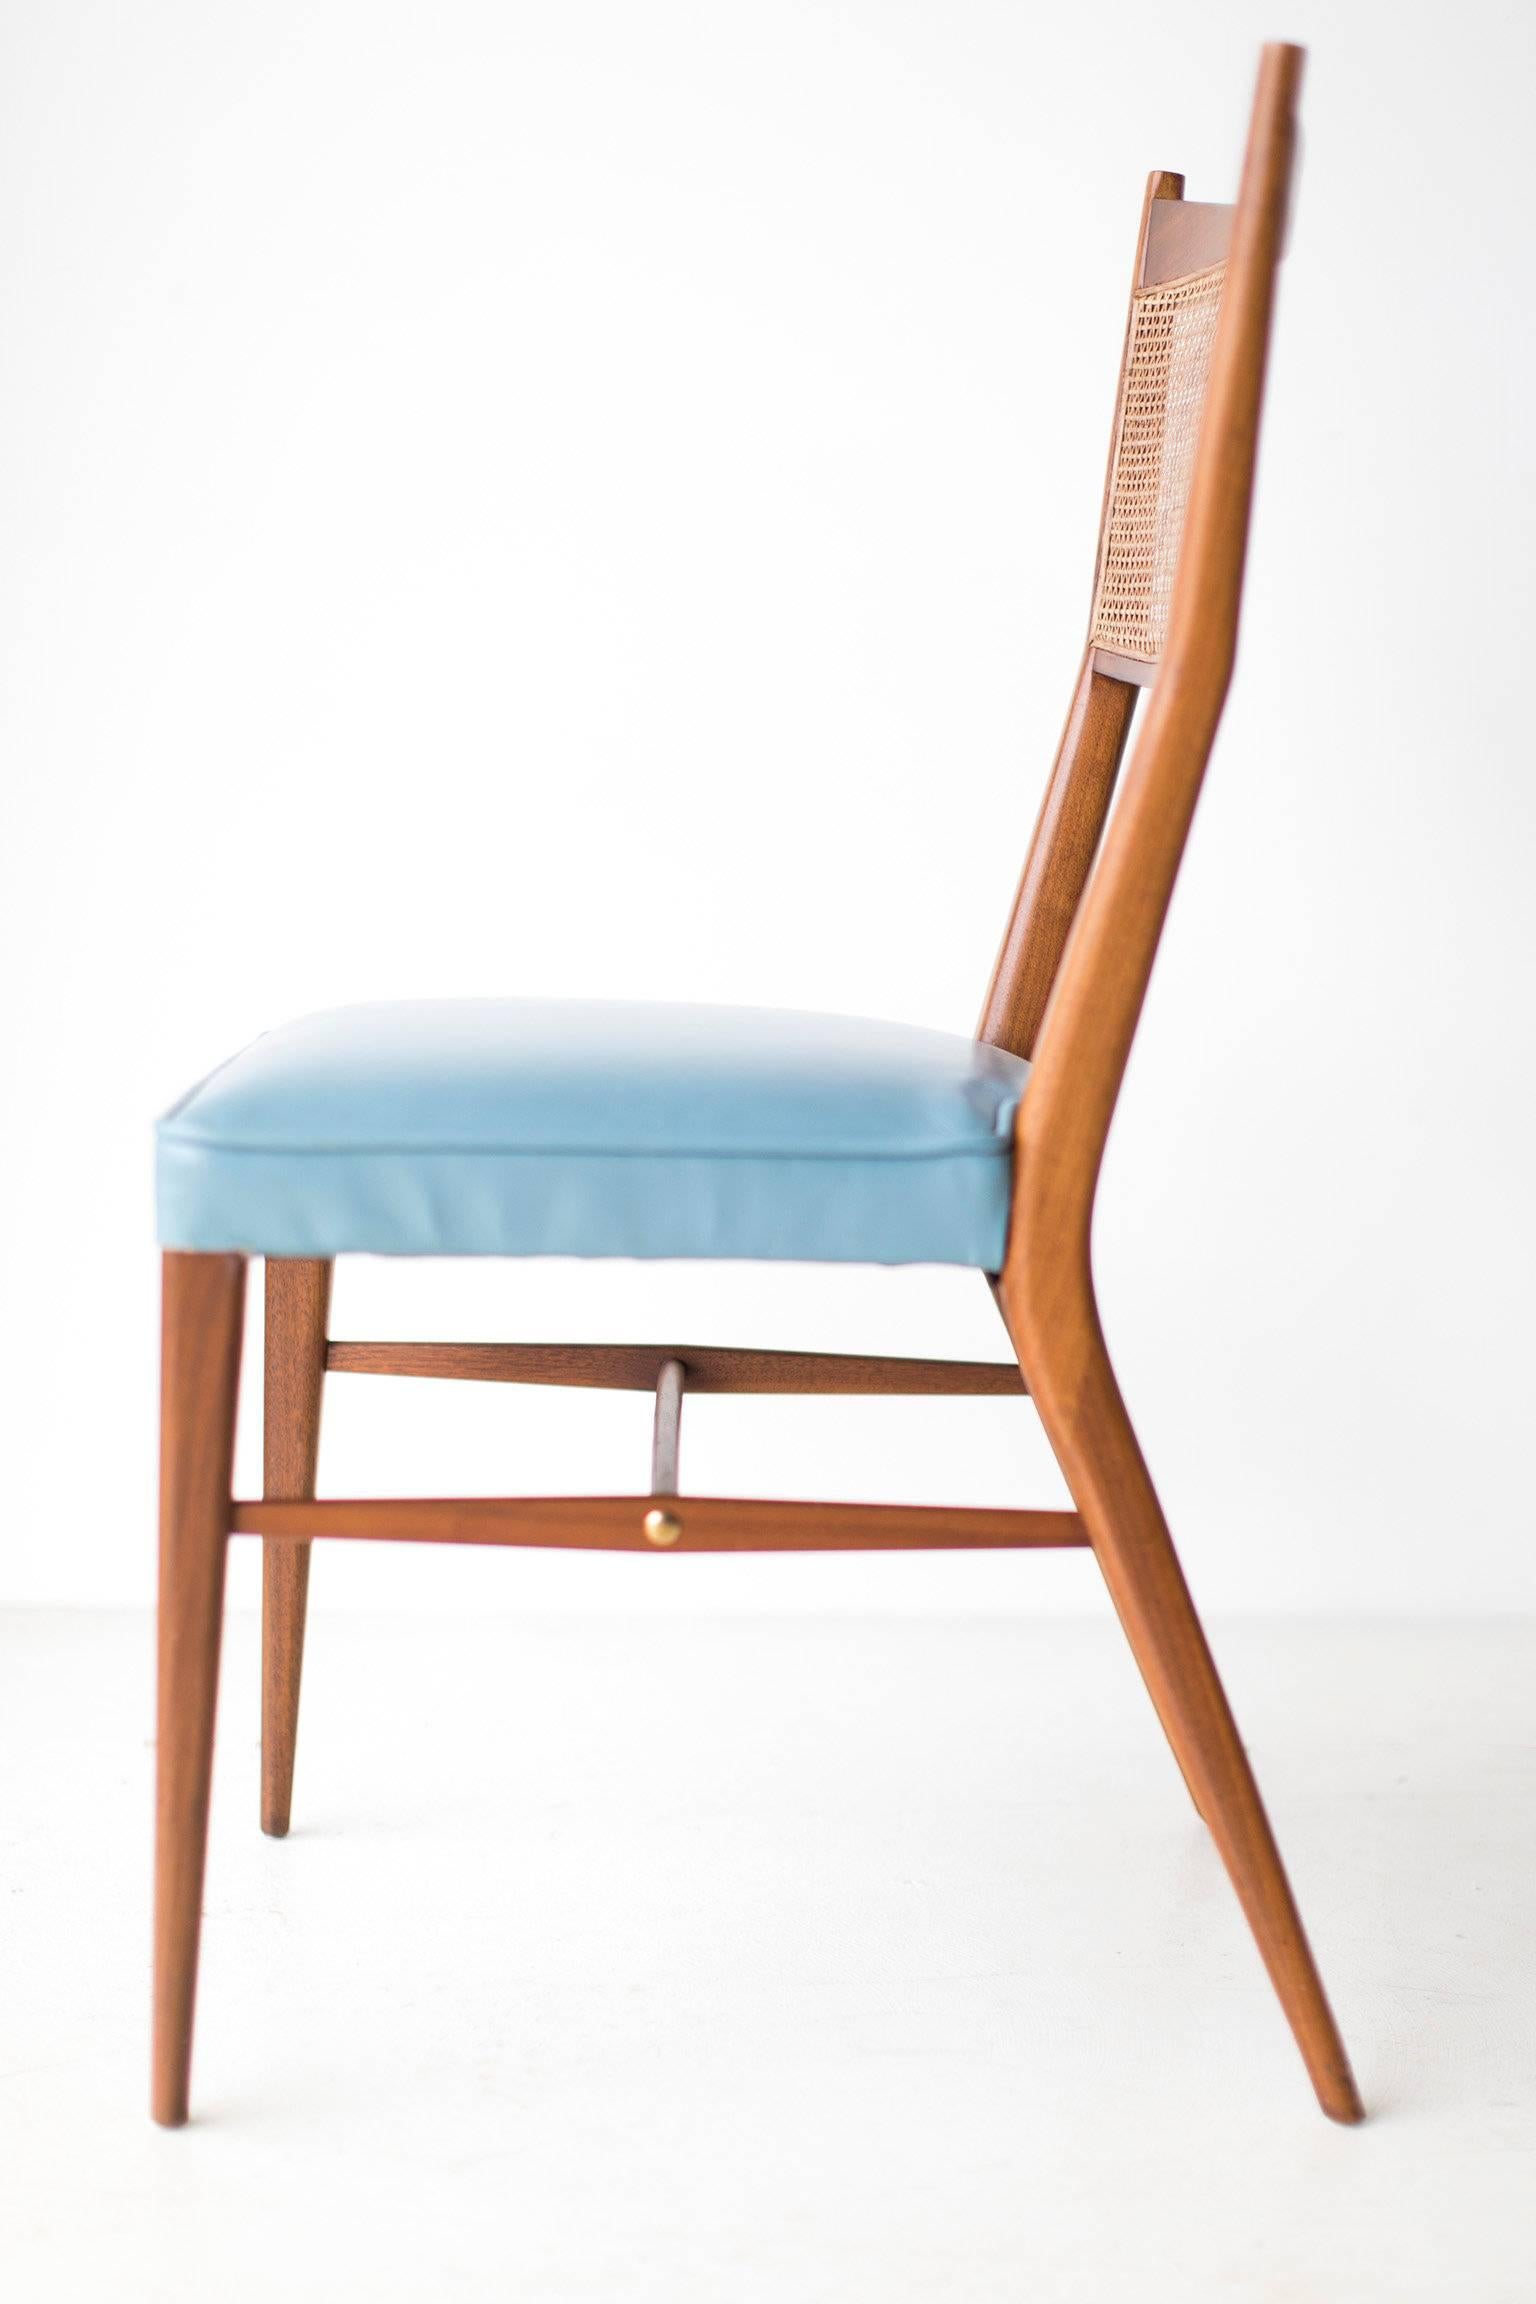 Paul McCobb Dining Chairs for H Sacks & Sons, Connoisseur Collection 2